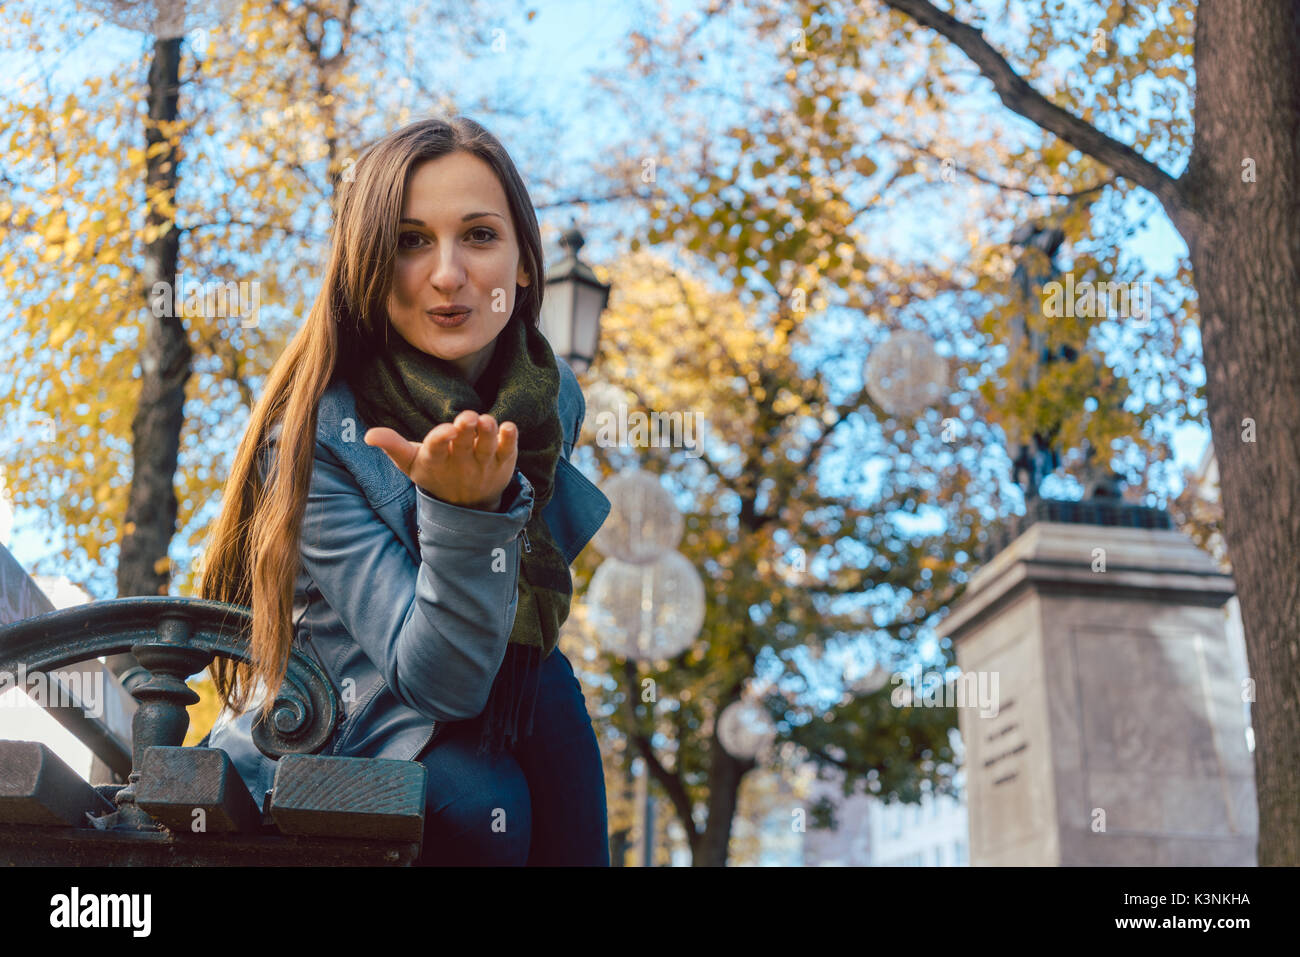 Woman in love blowing kiss in autumn park Banque D'Images